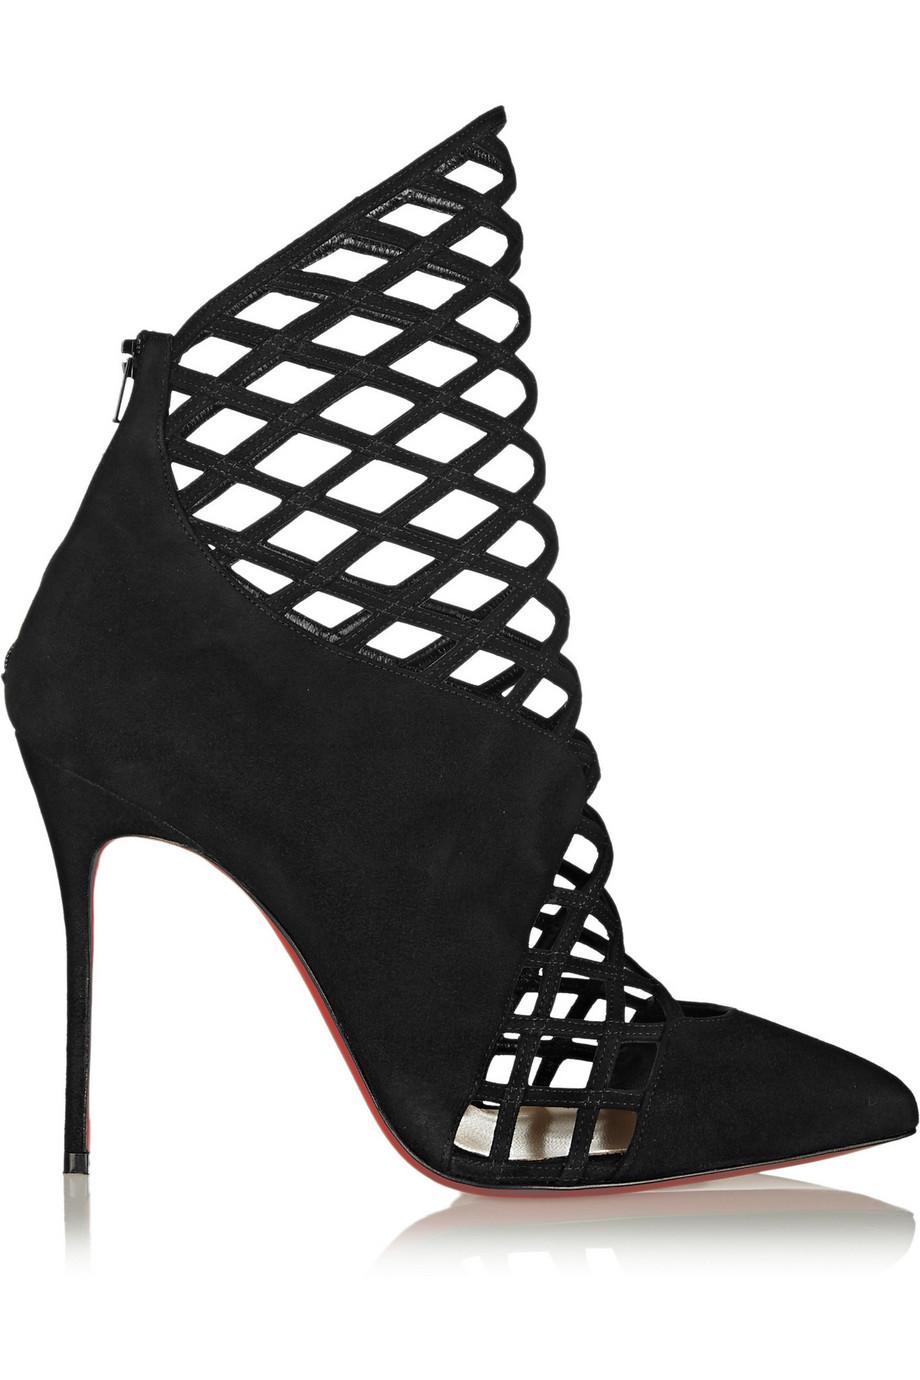 Christian Louboutin NEW Black Suede Evening Cut Out Ankle Boots Booties in Box 1